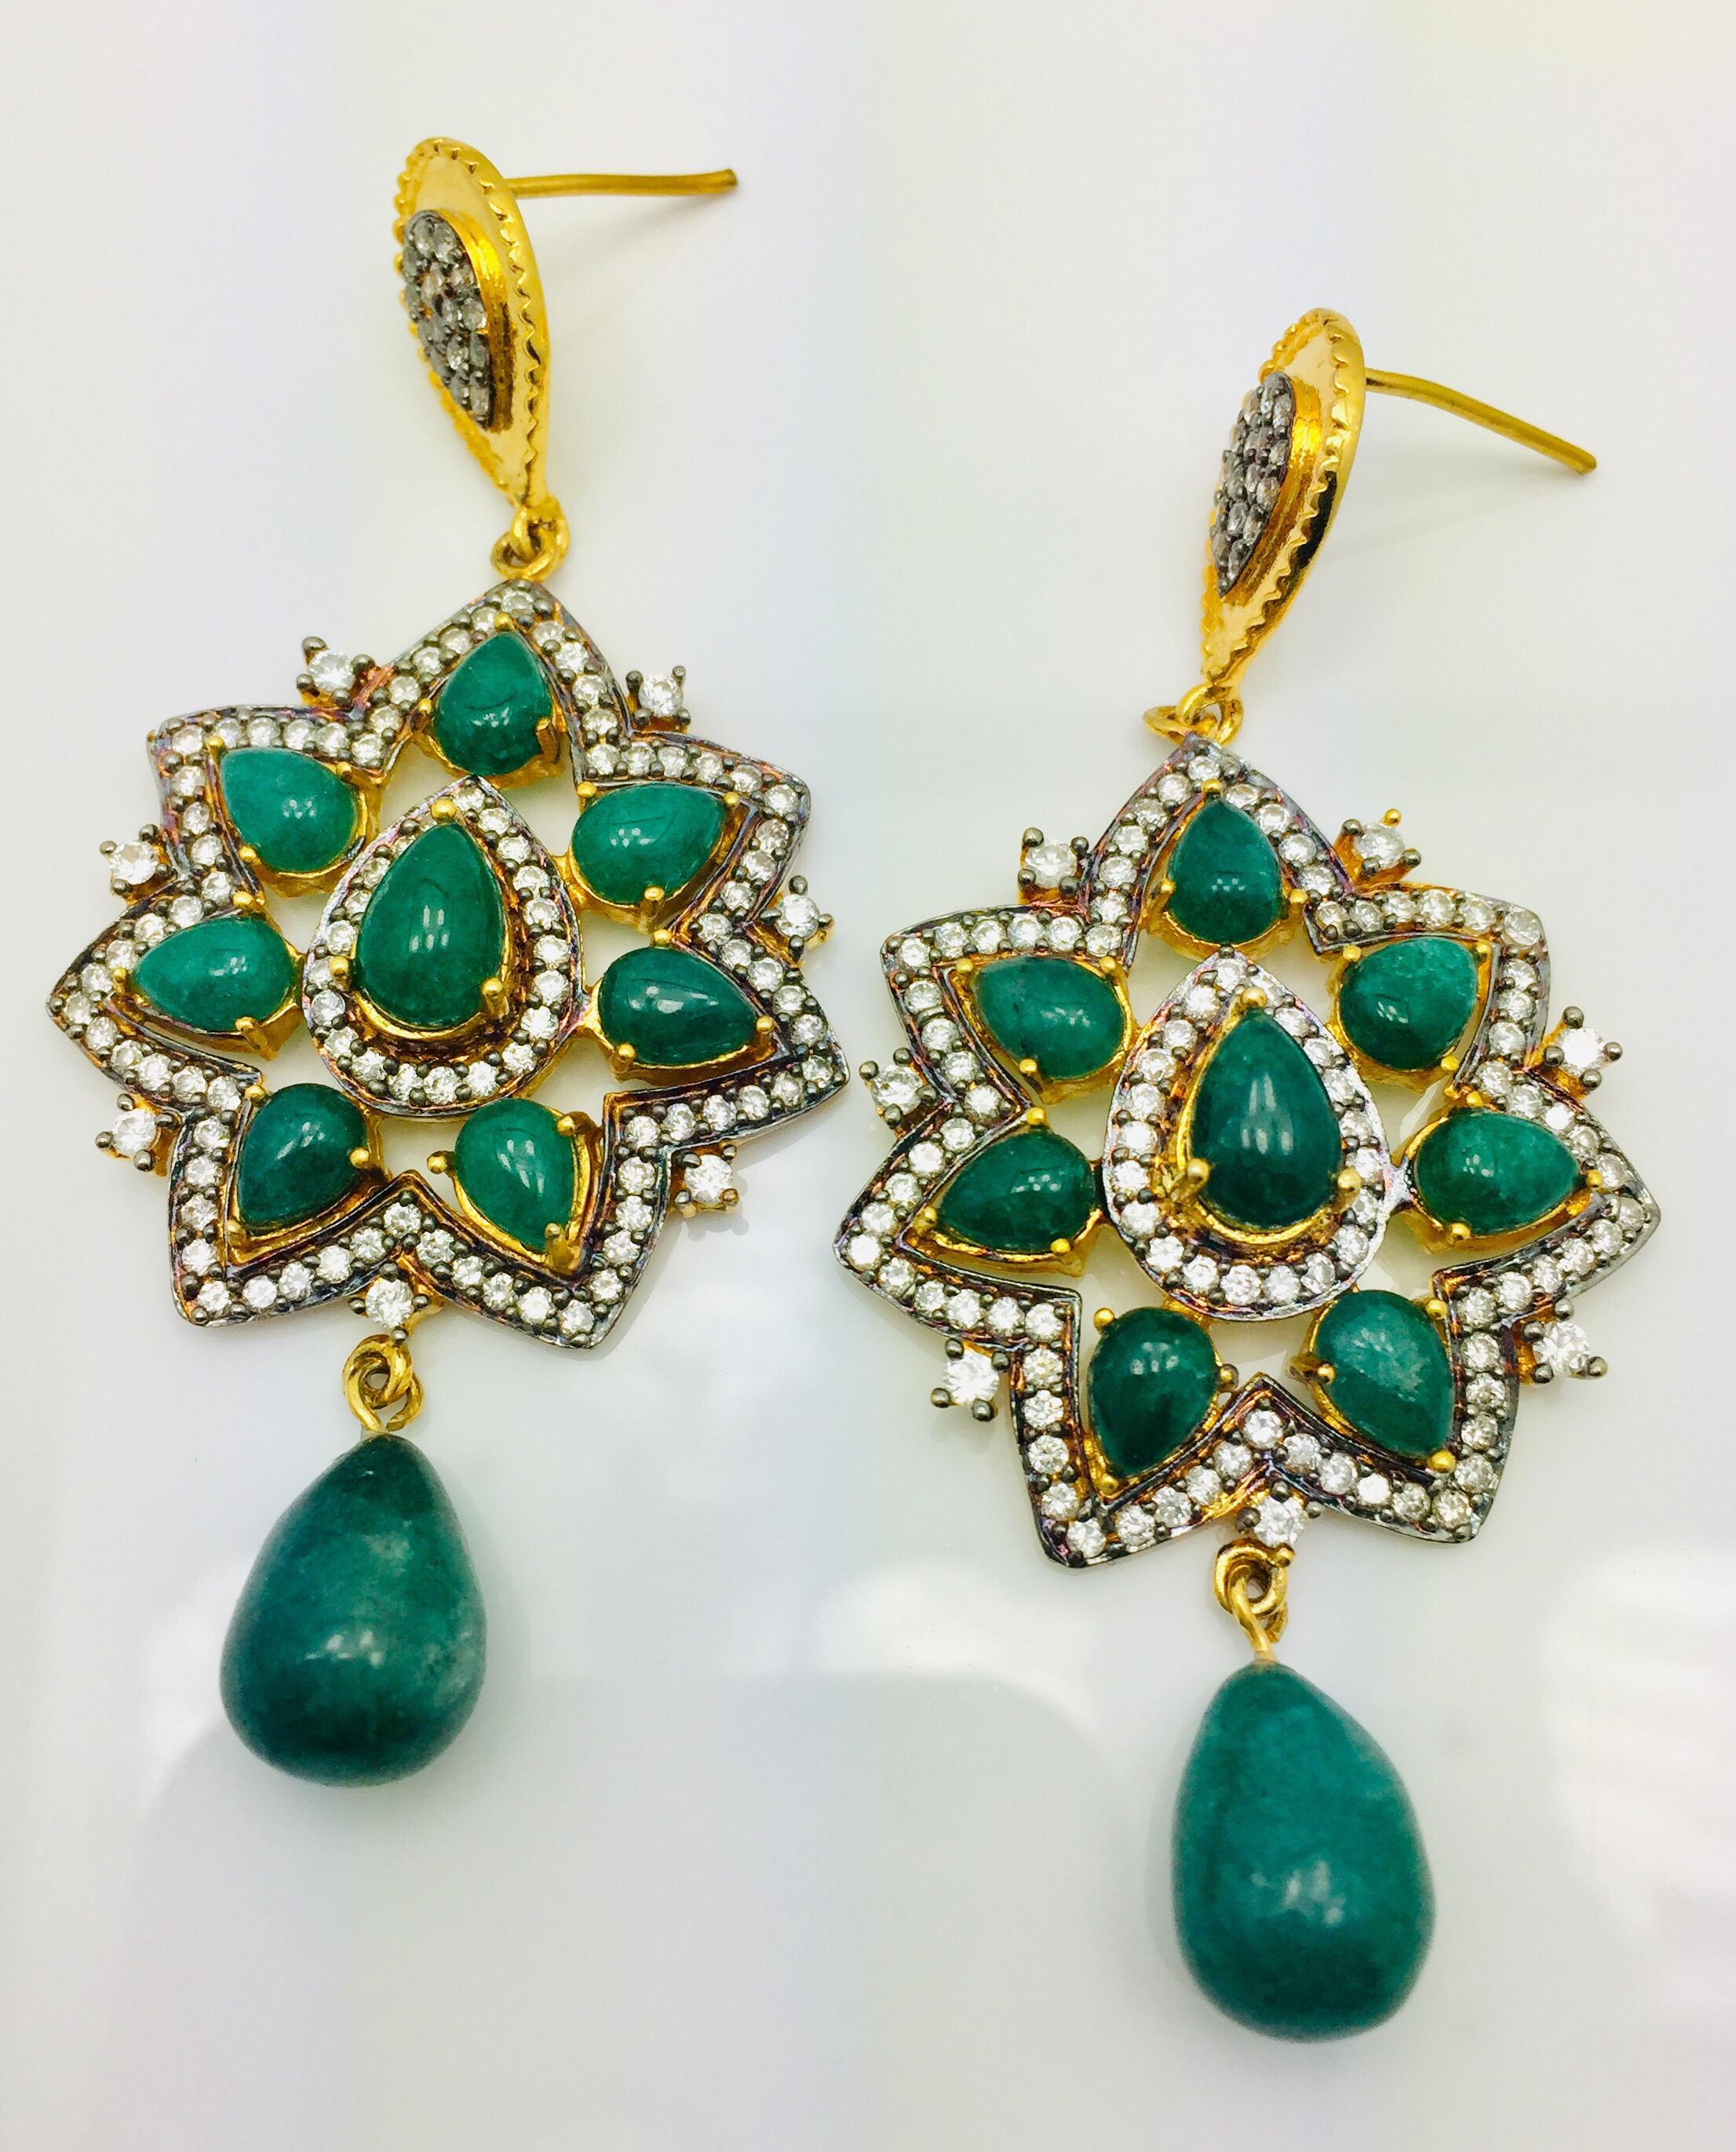 The Taj Mahal inspired design is ornate and lovely, and the striking green quartz stone is further enhanced by sparkling CZ stones overall. Earrings have a post closure for pierced ears.  Only 1 left.

Worn by Kelly Rutherford in 